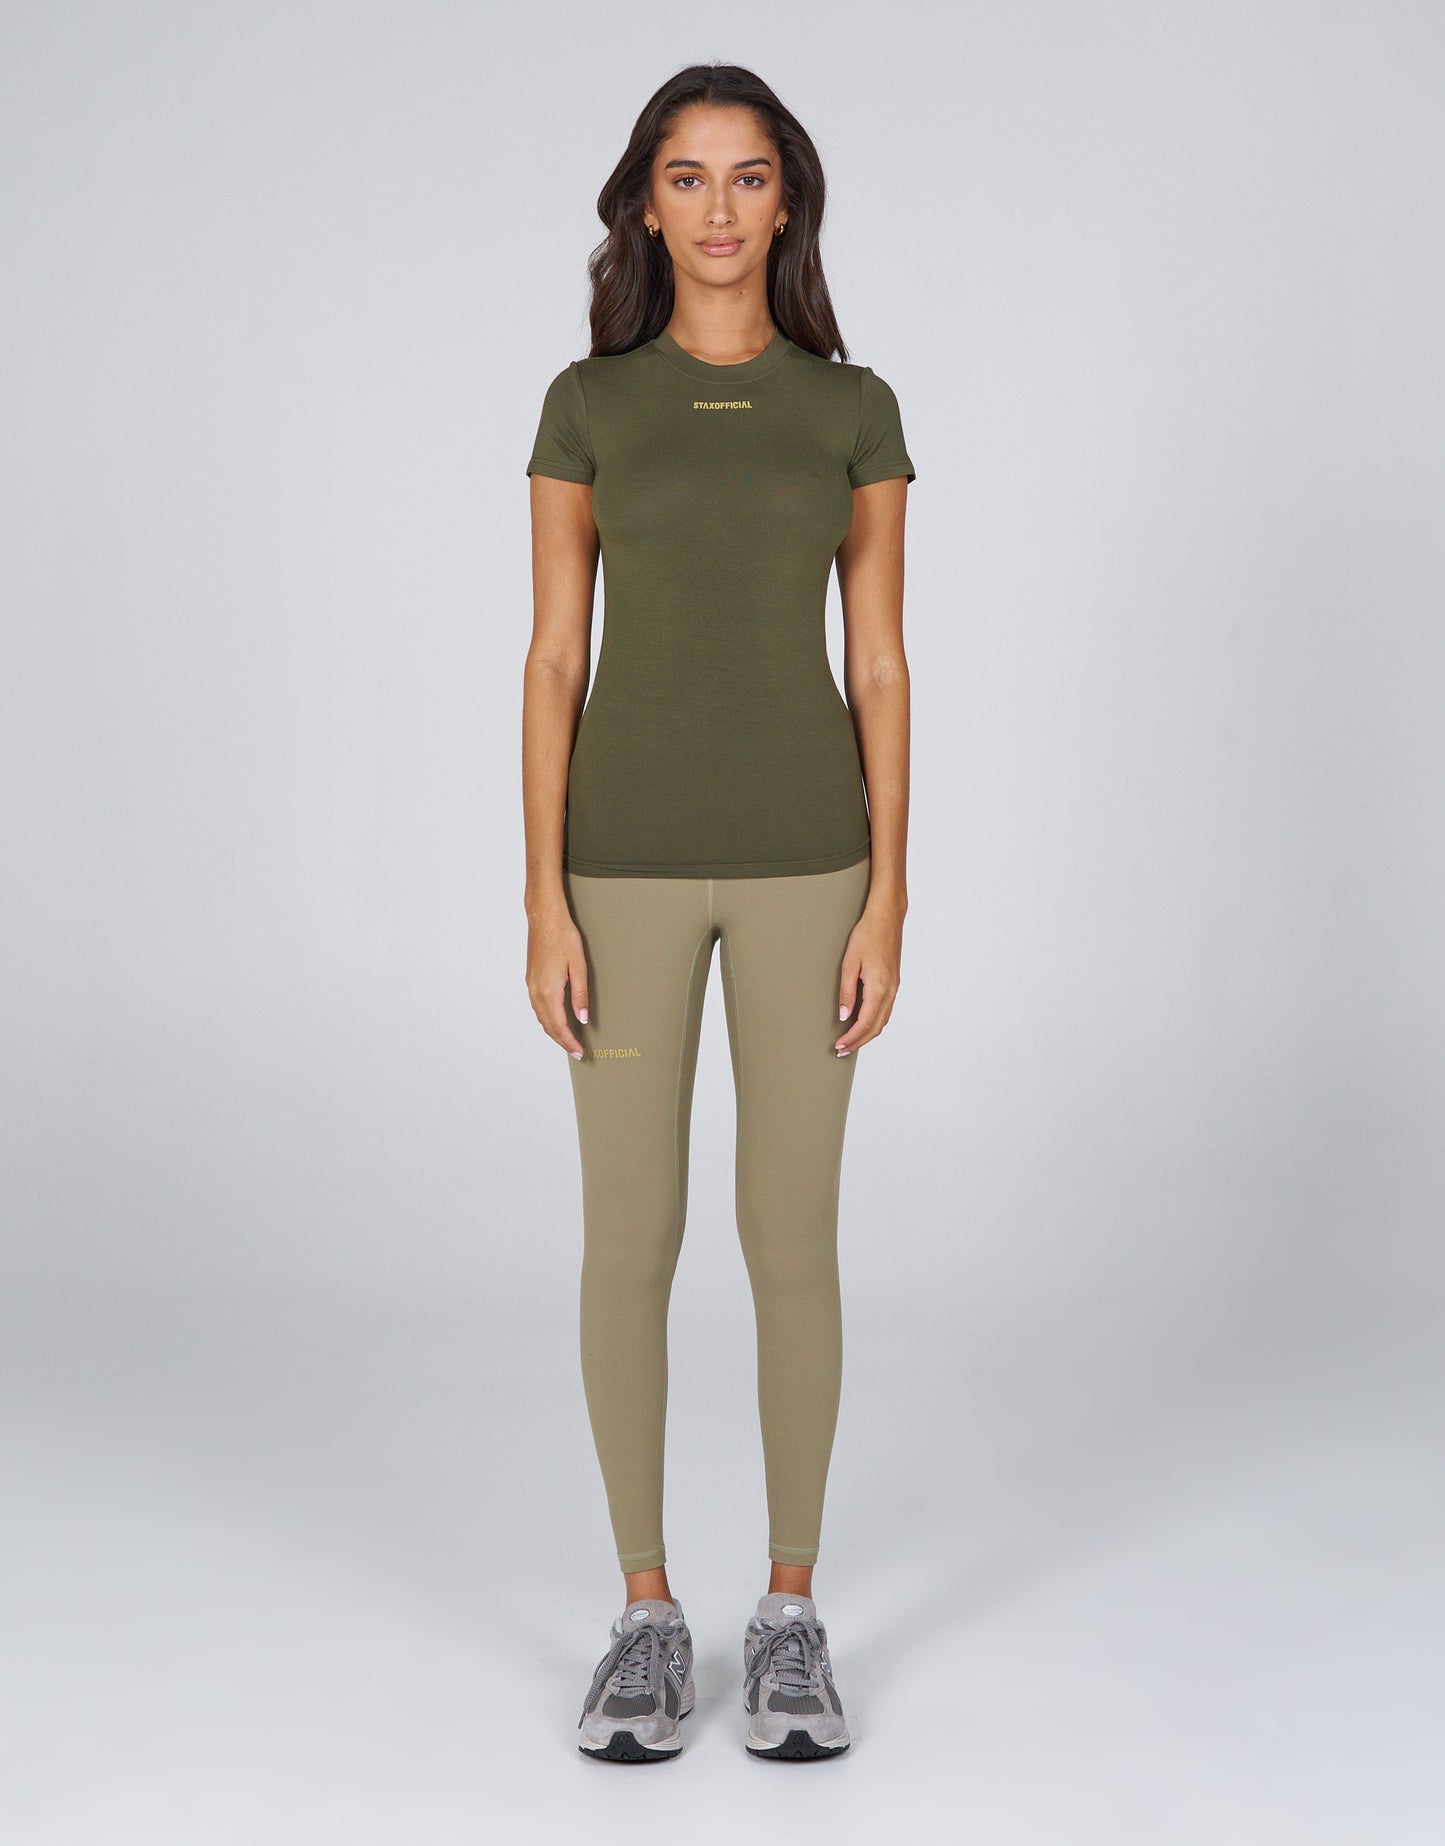 STAX. AW Womens Tee - Oryx (Olive)